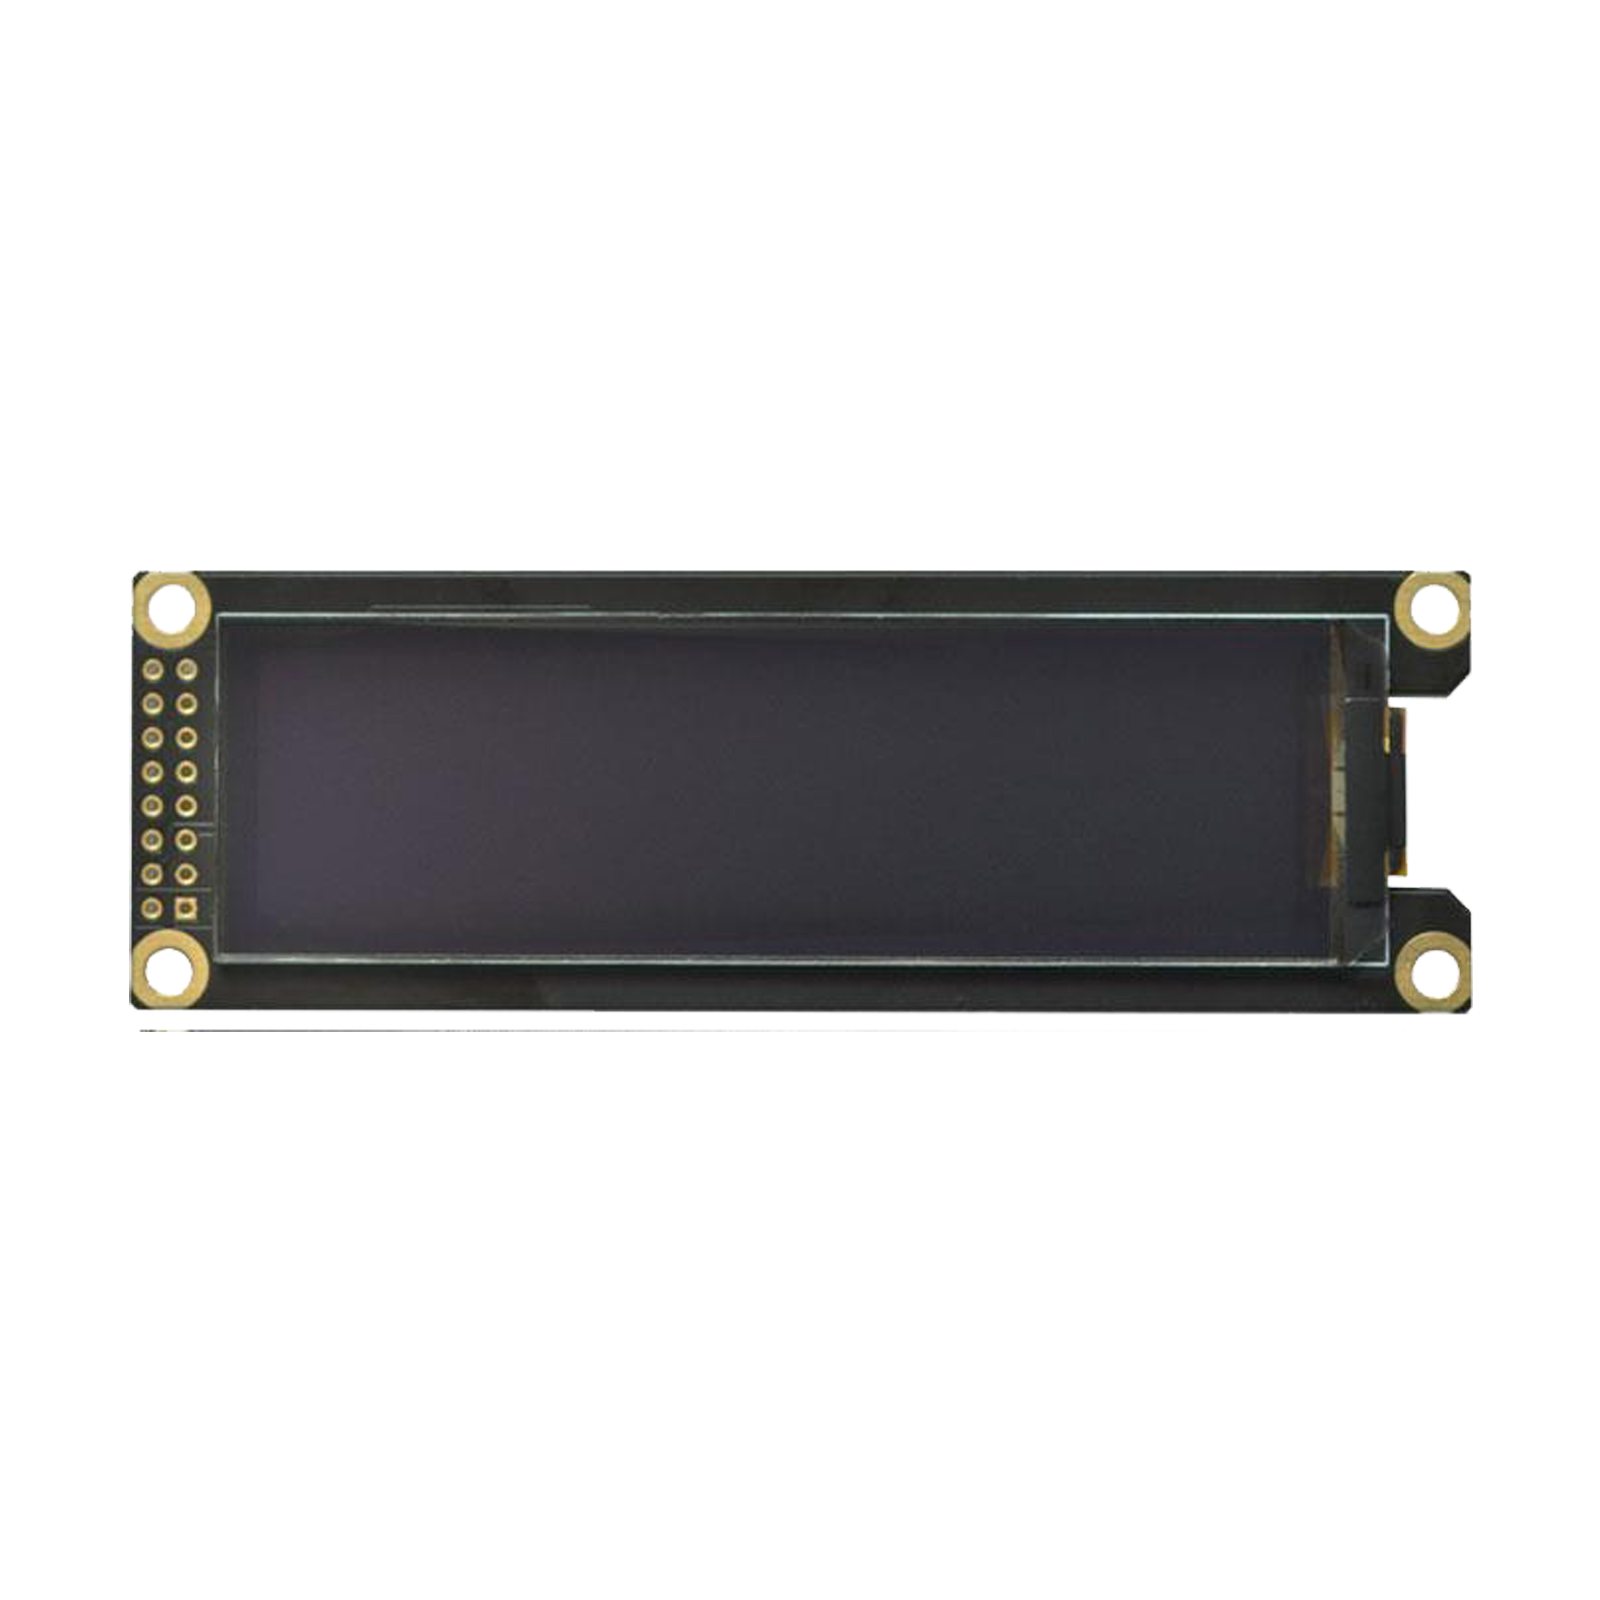 3.12-inch 256x64 OLED graphic display module with SPI interface